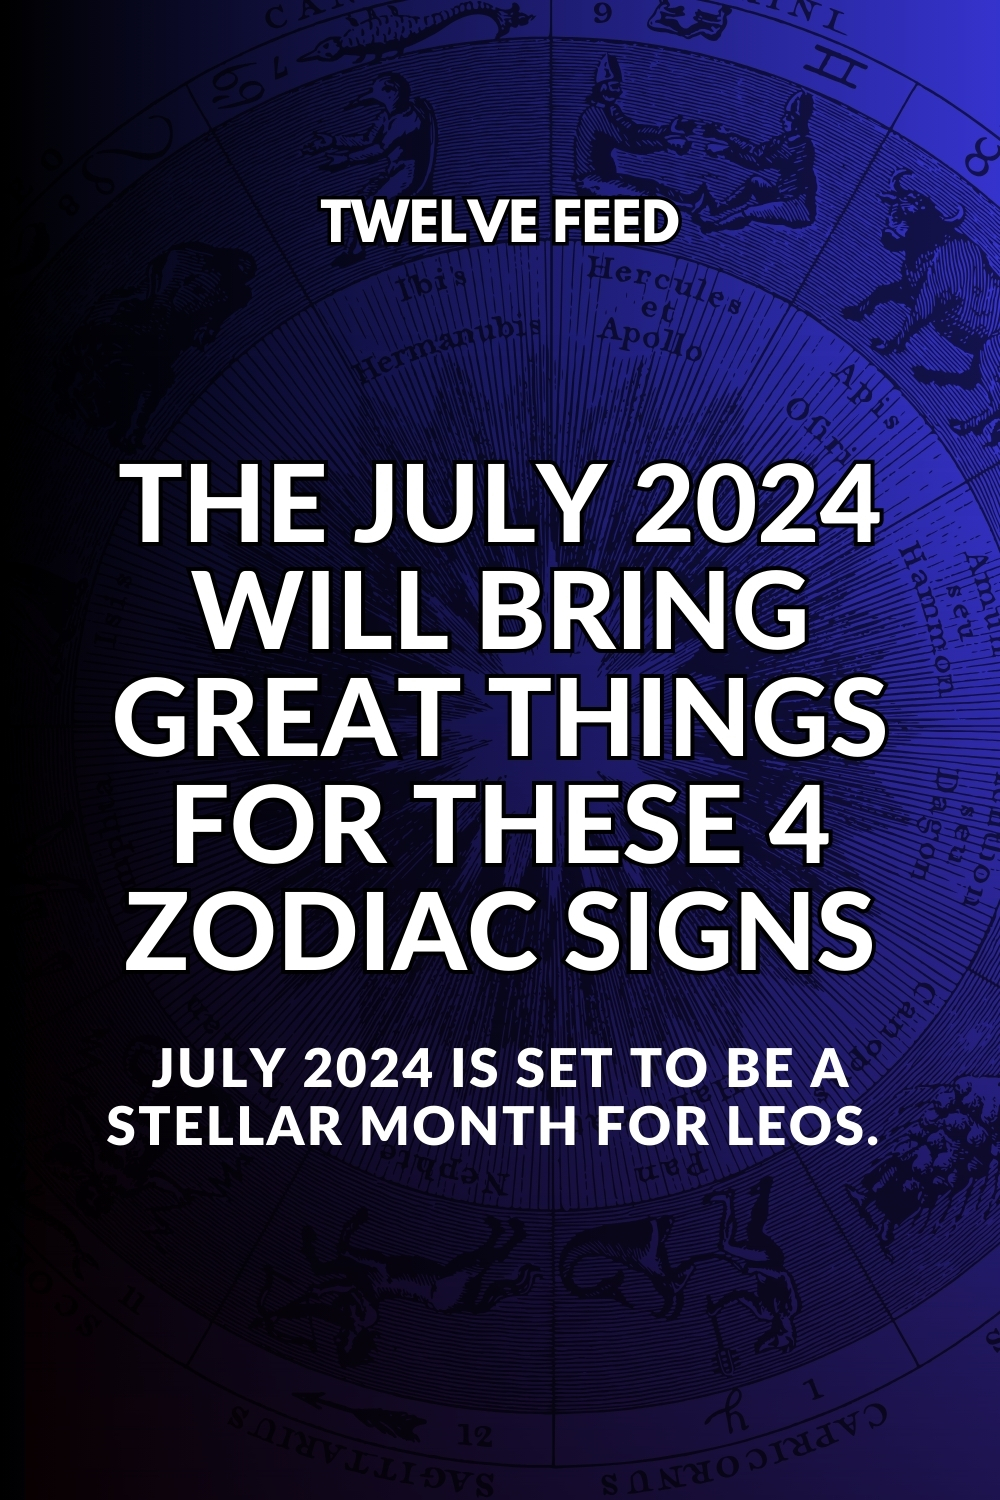 The July 2024 Will Bring Great Things For These 4 Zodiac Signs